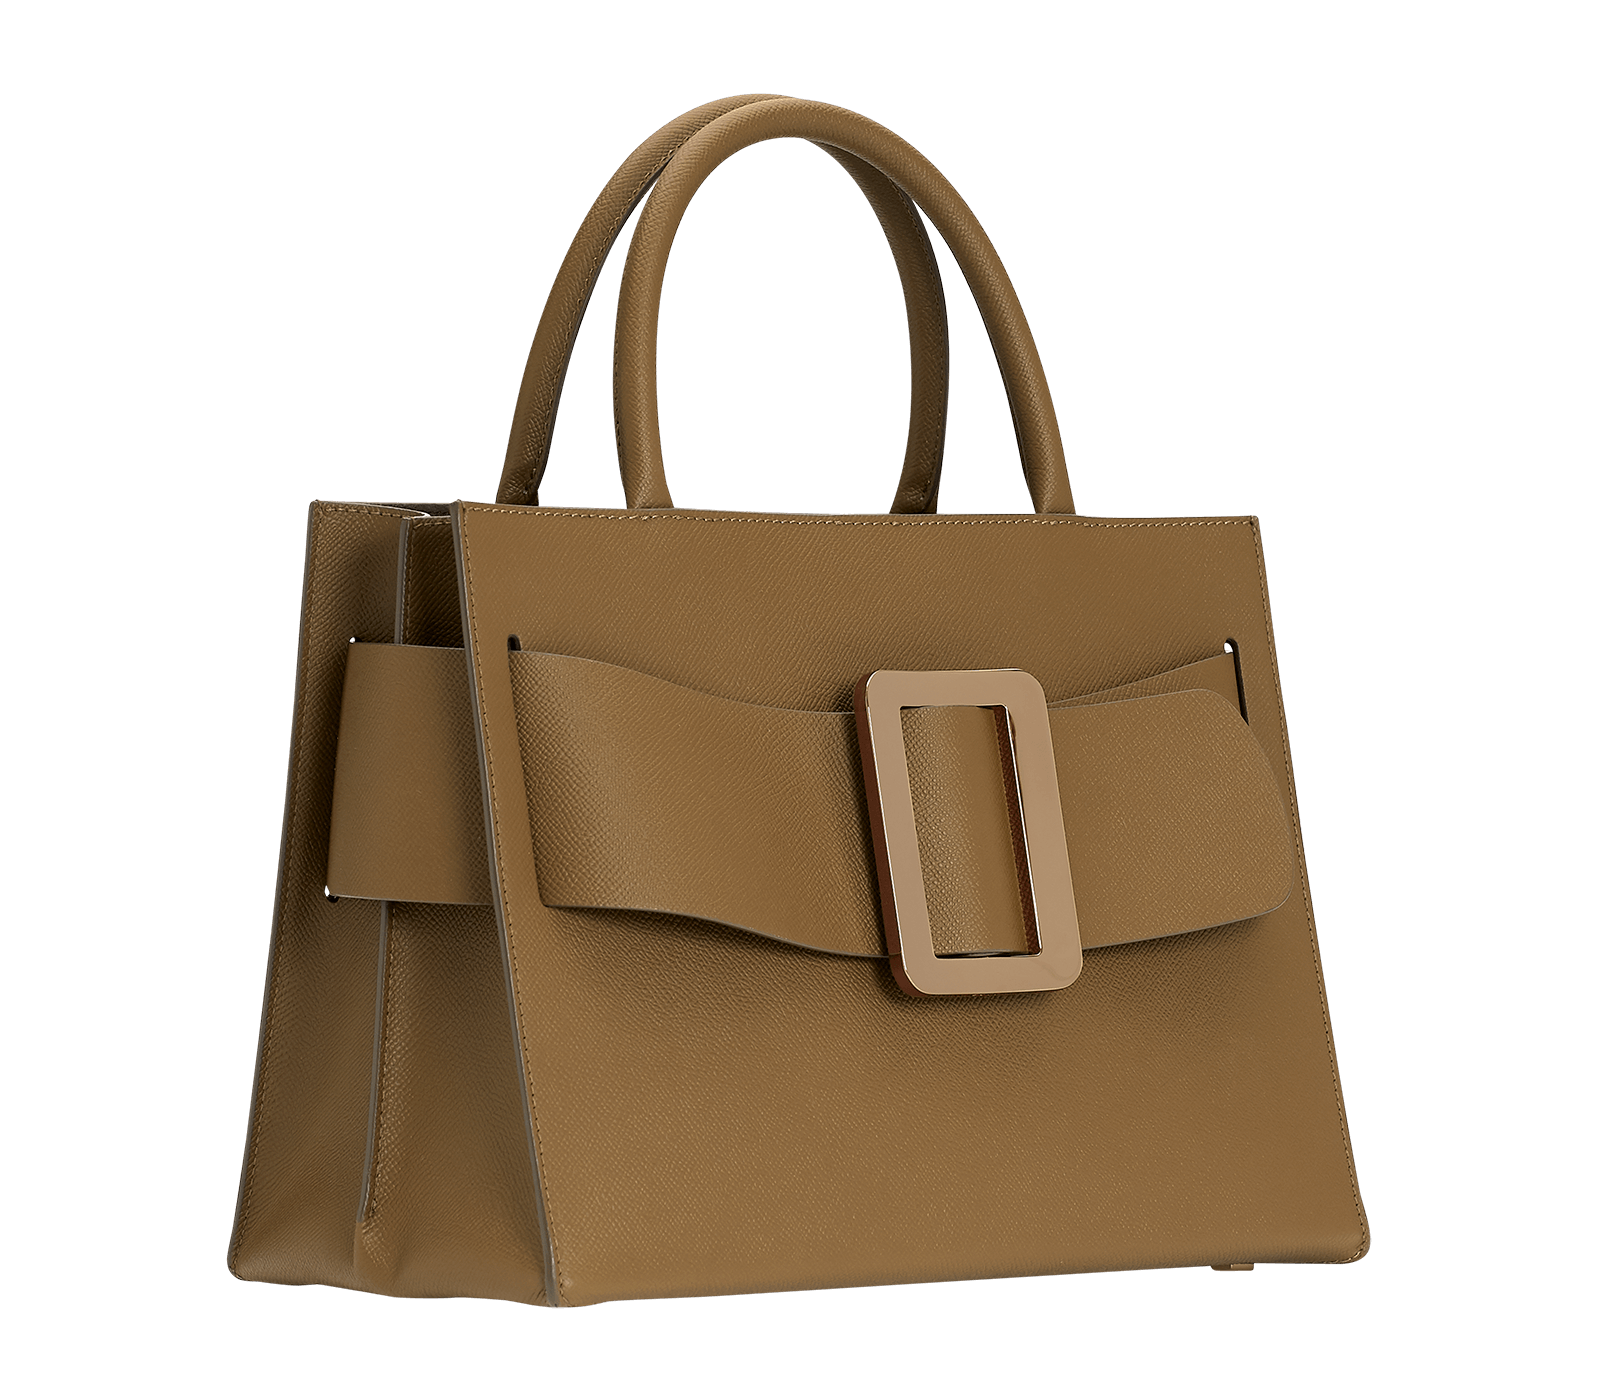 Large, structured brown handbag with a large gold buckle on the front, carry strap, and twin handles. Made with grained calfskin leather.